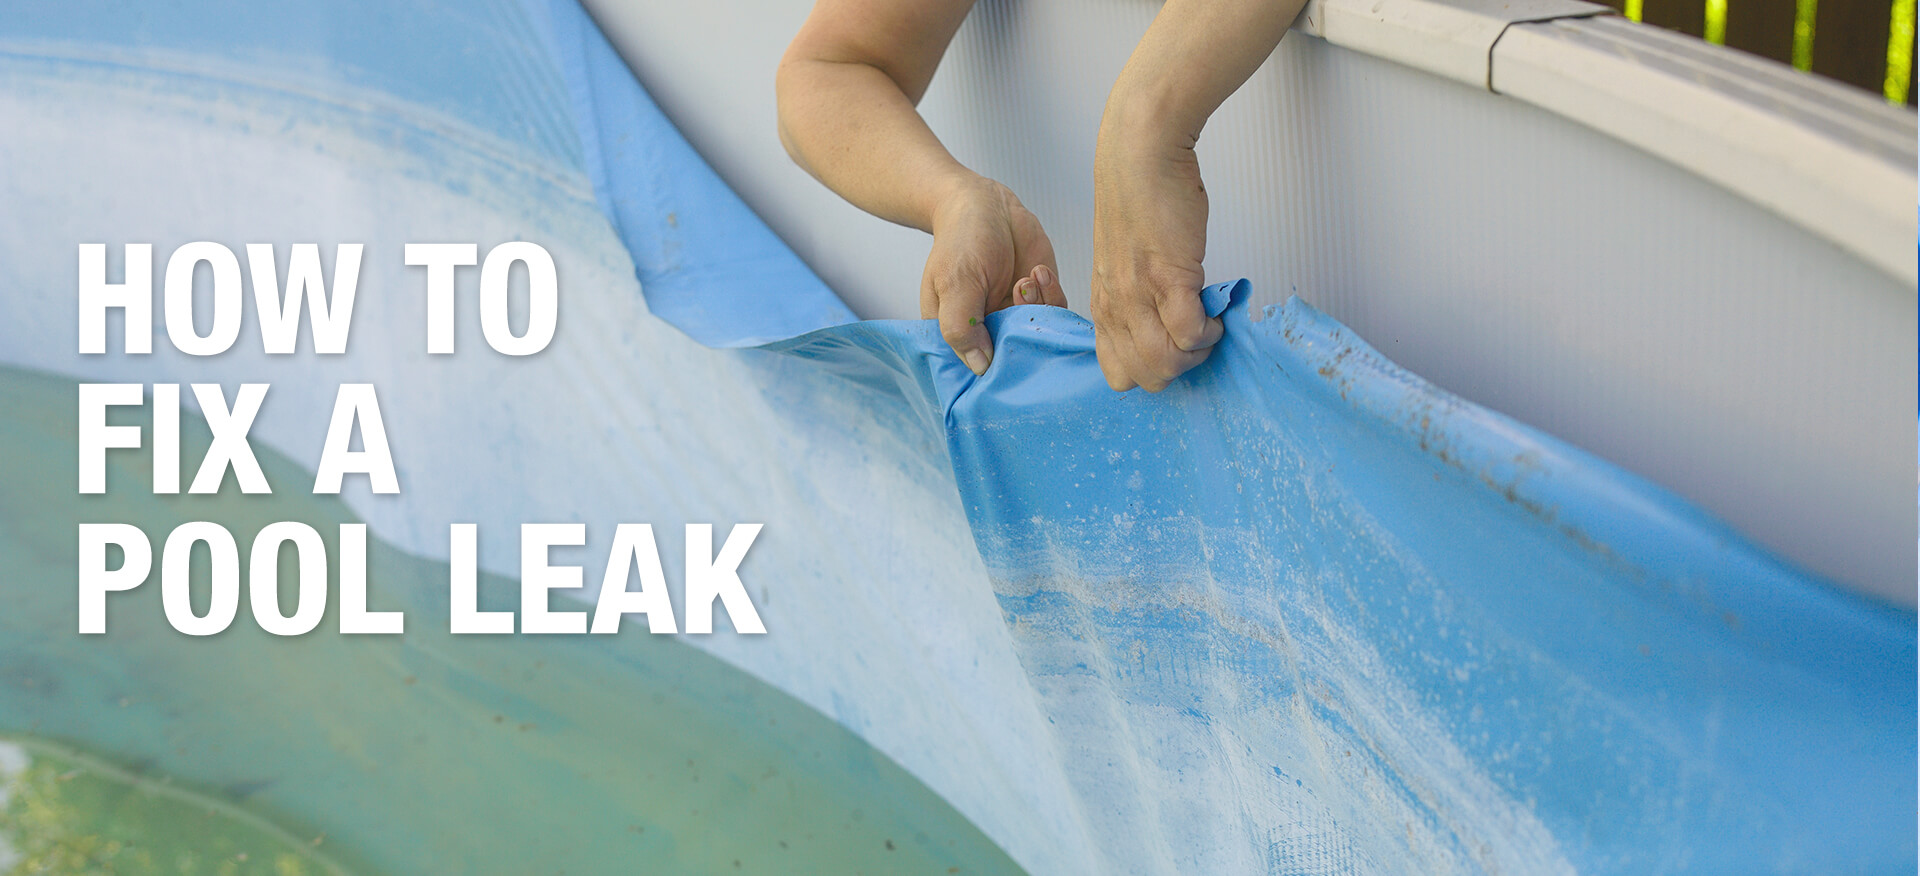 How To Find A Leak In A Pool Liner With Food Coloring